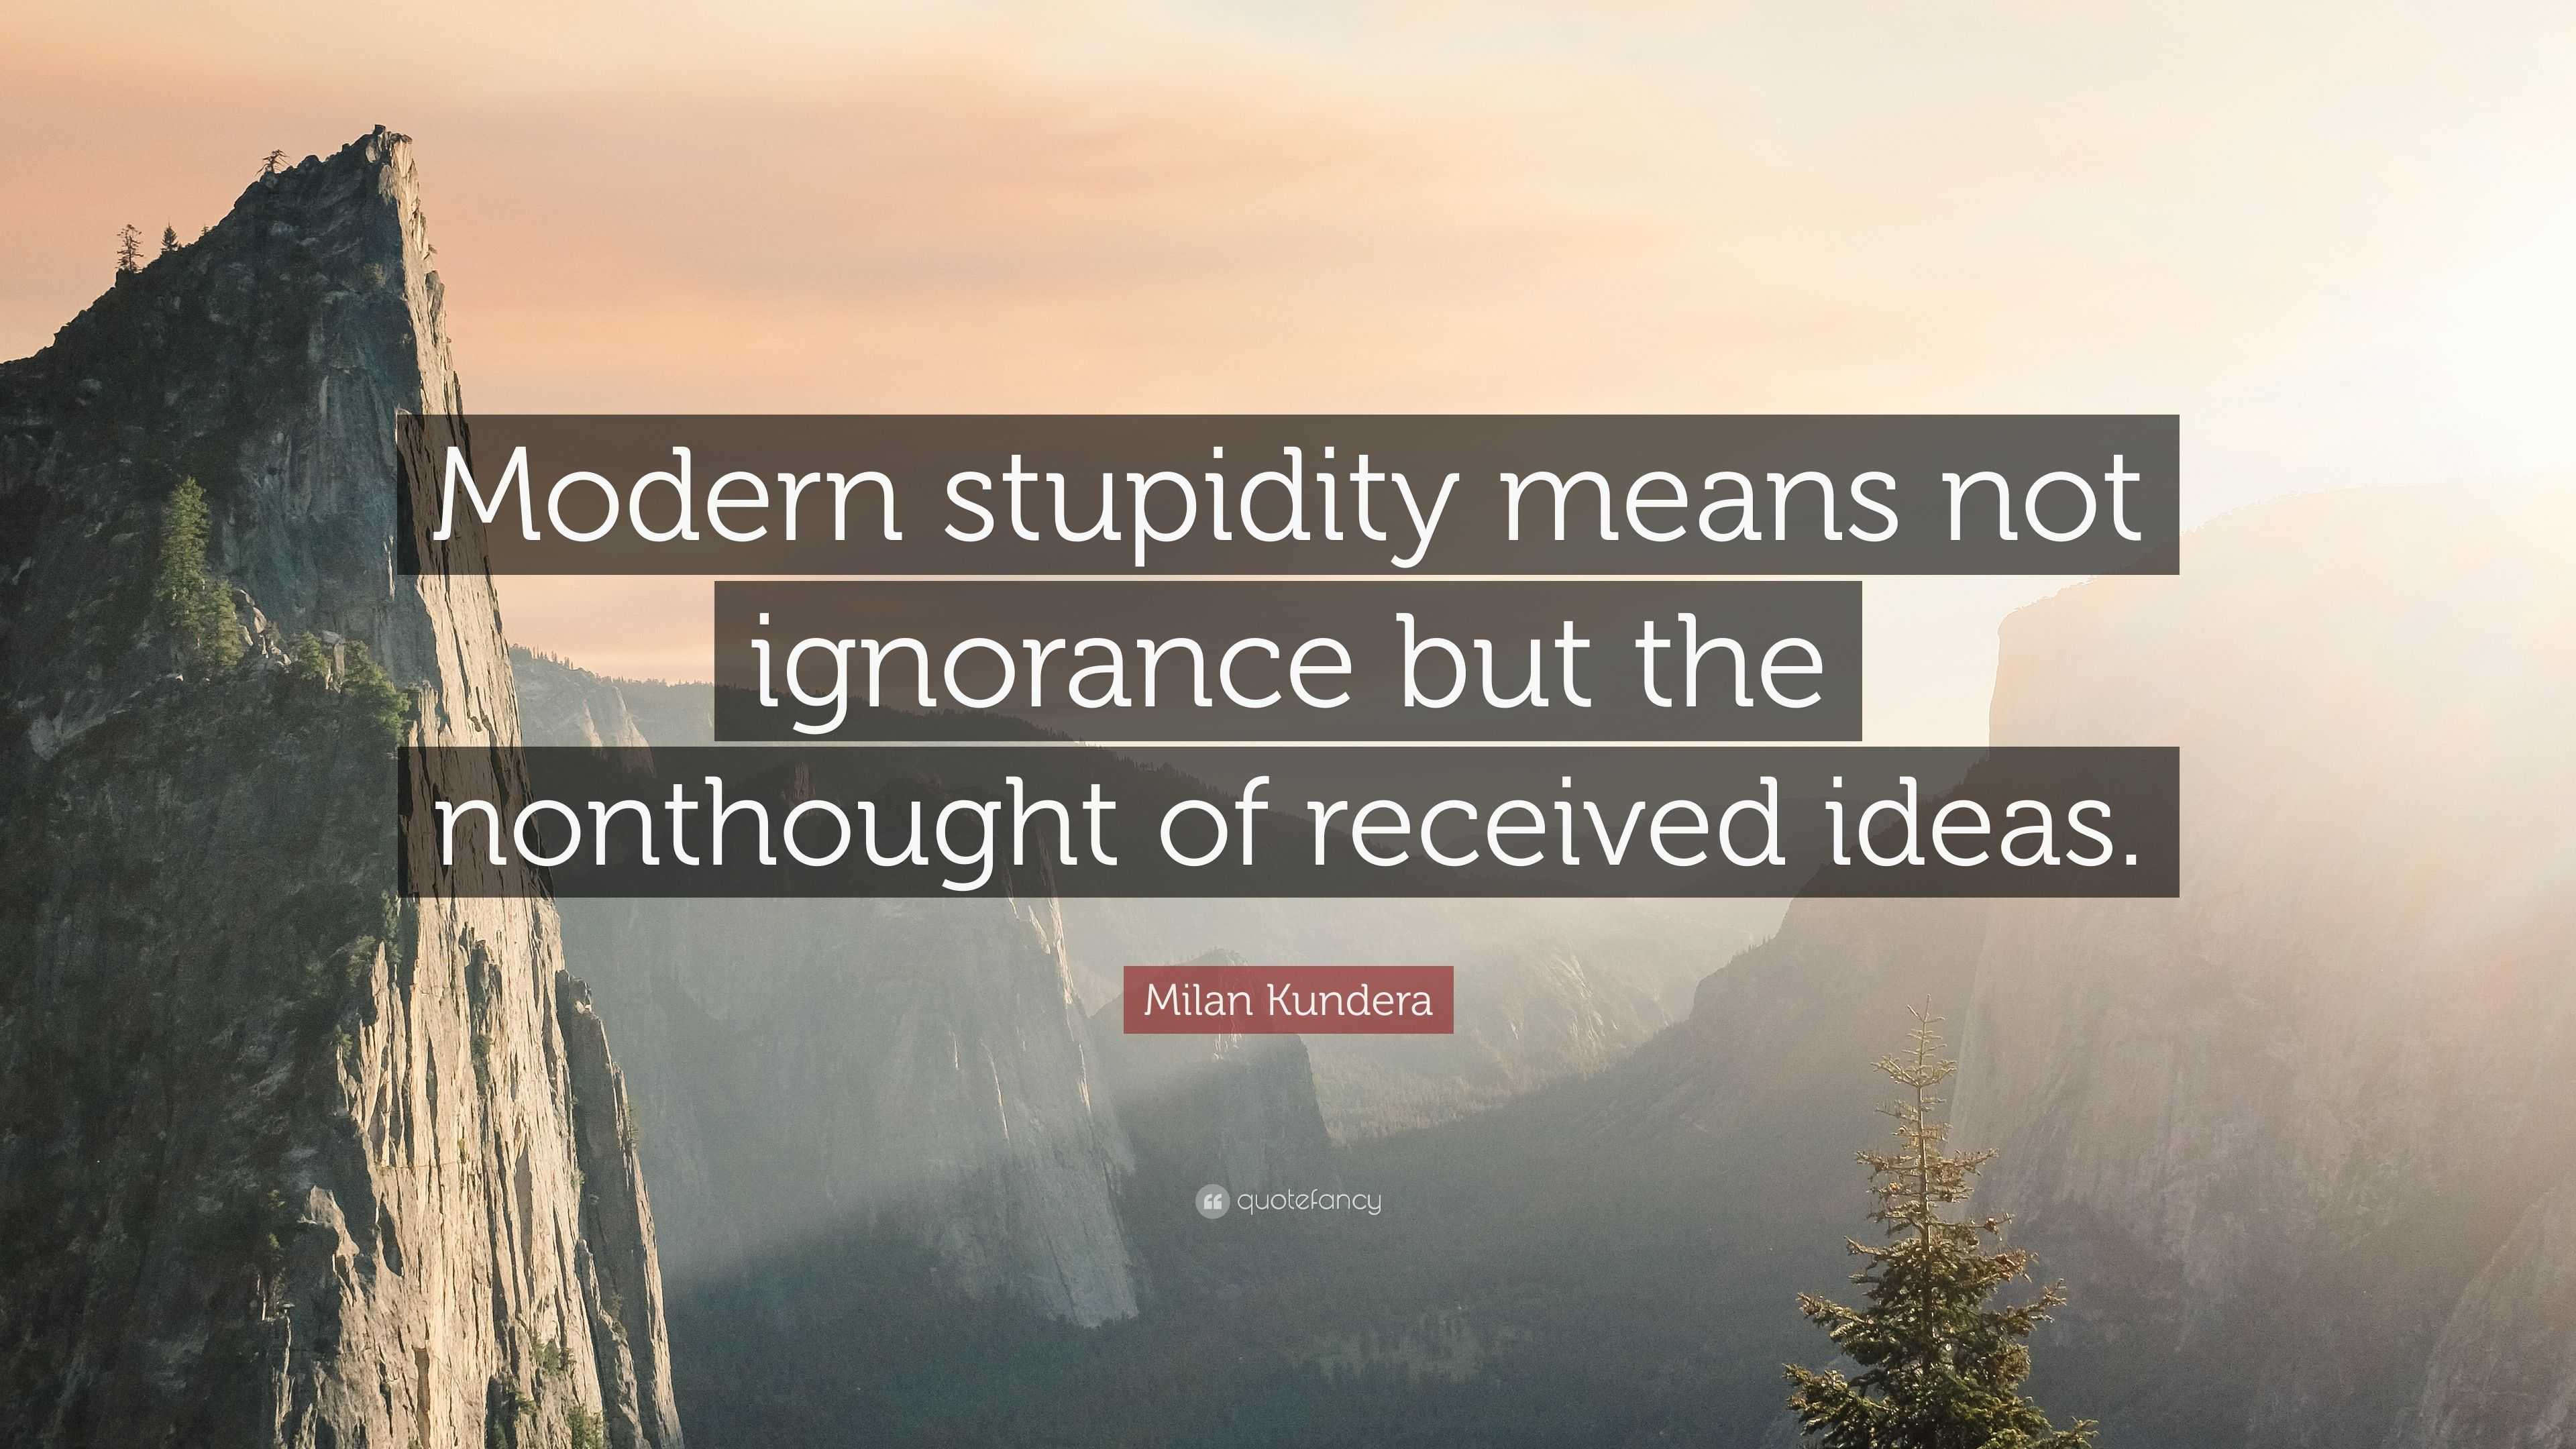 Milan Kundera Quote: “Modern stupidity means not ignorance but the ...